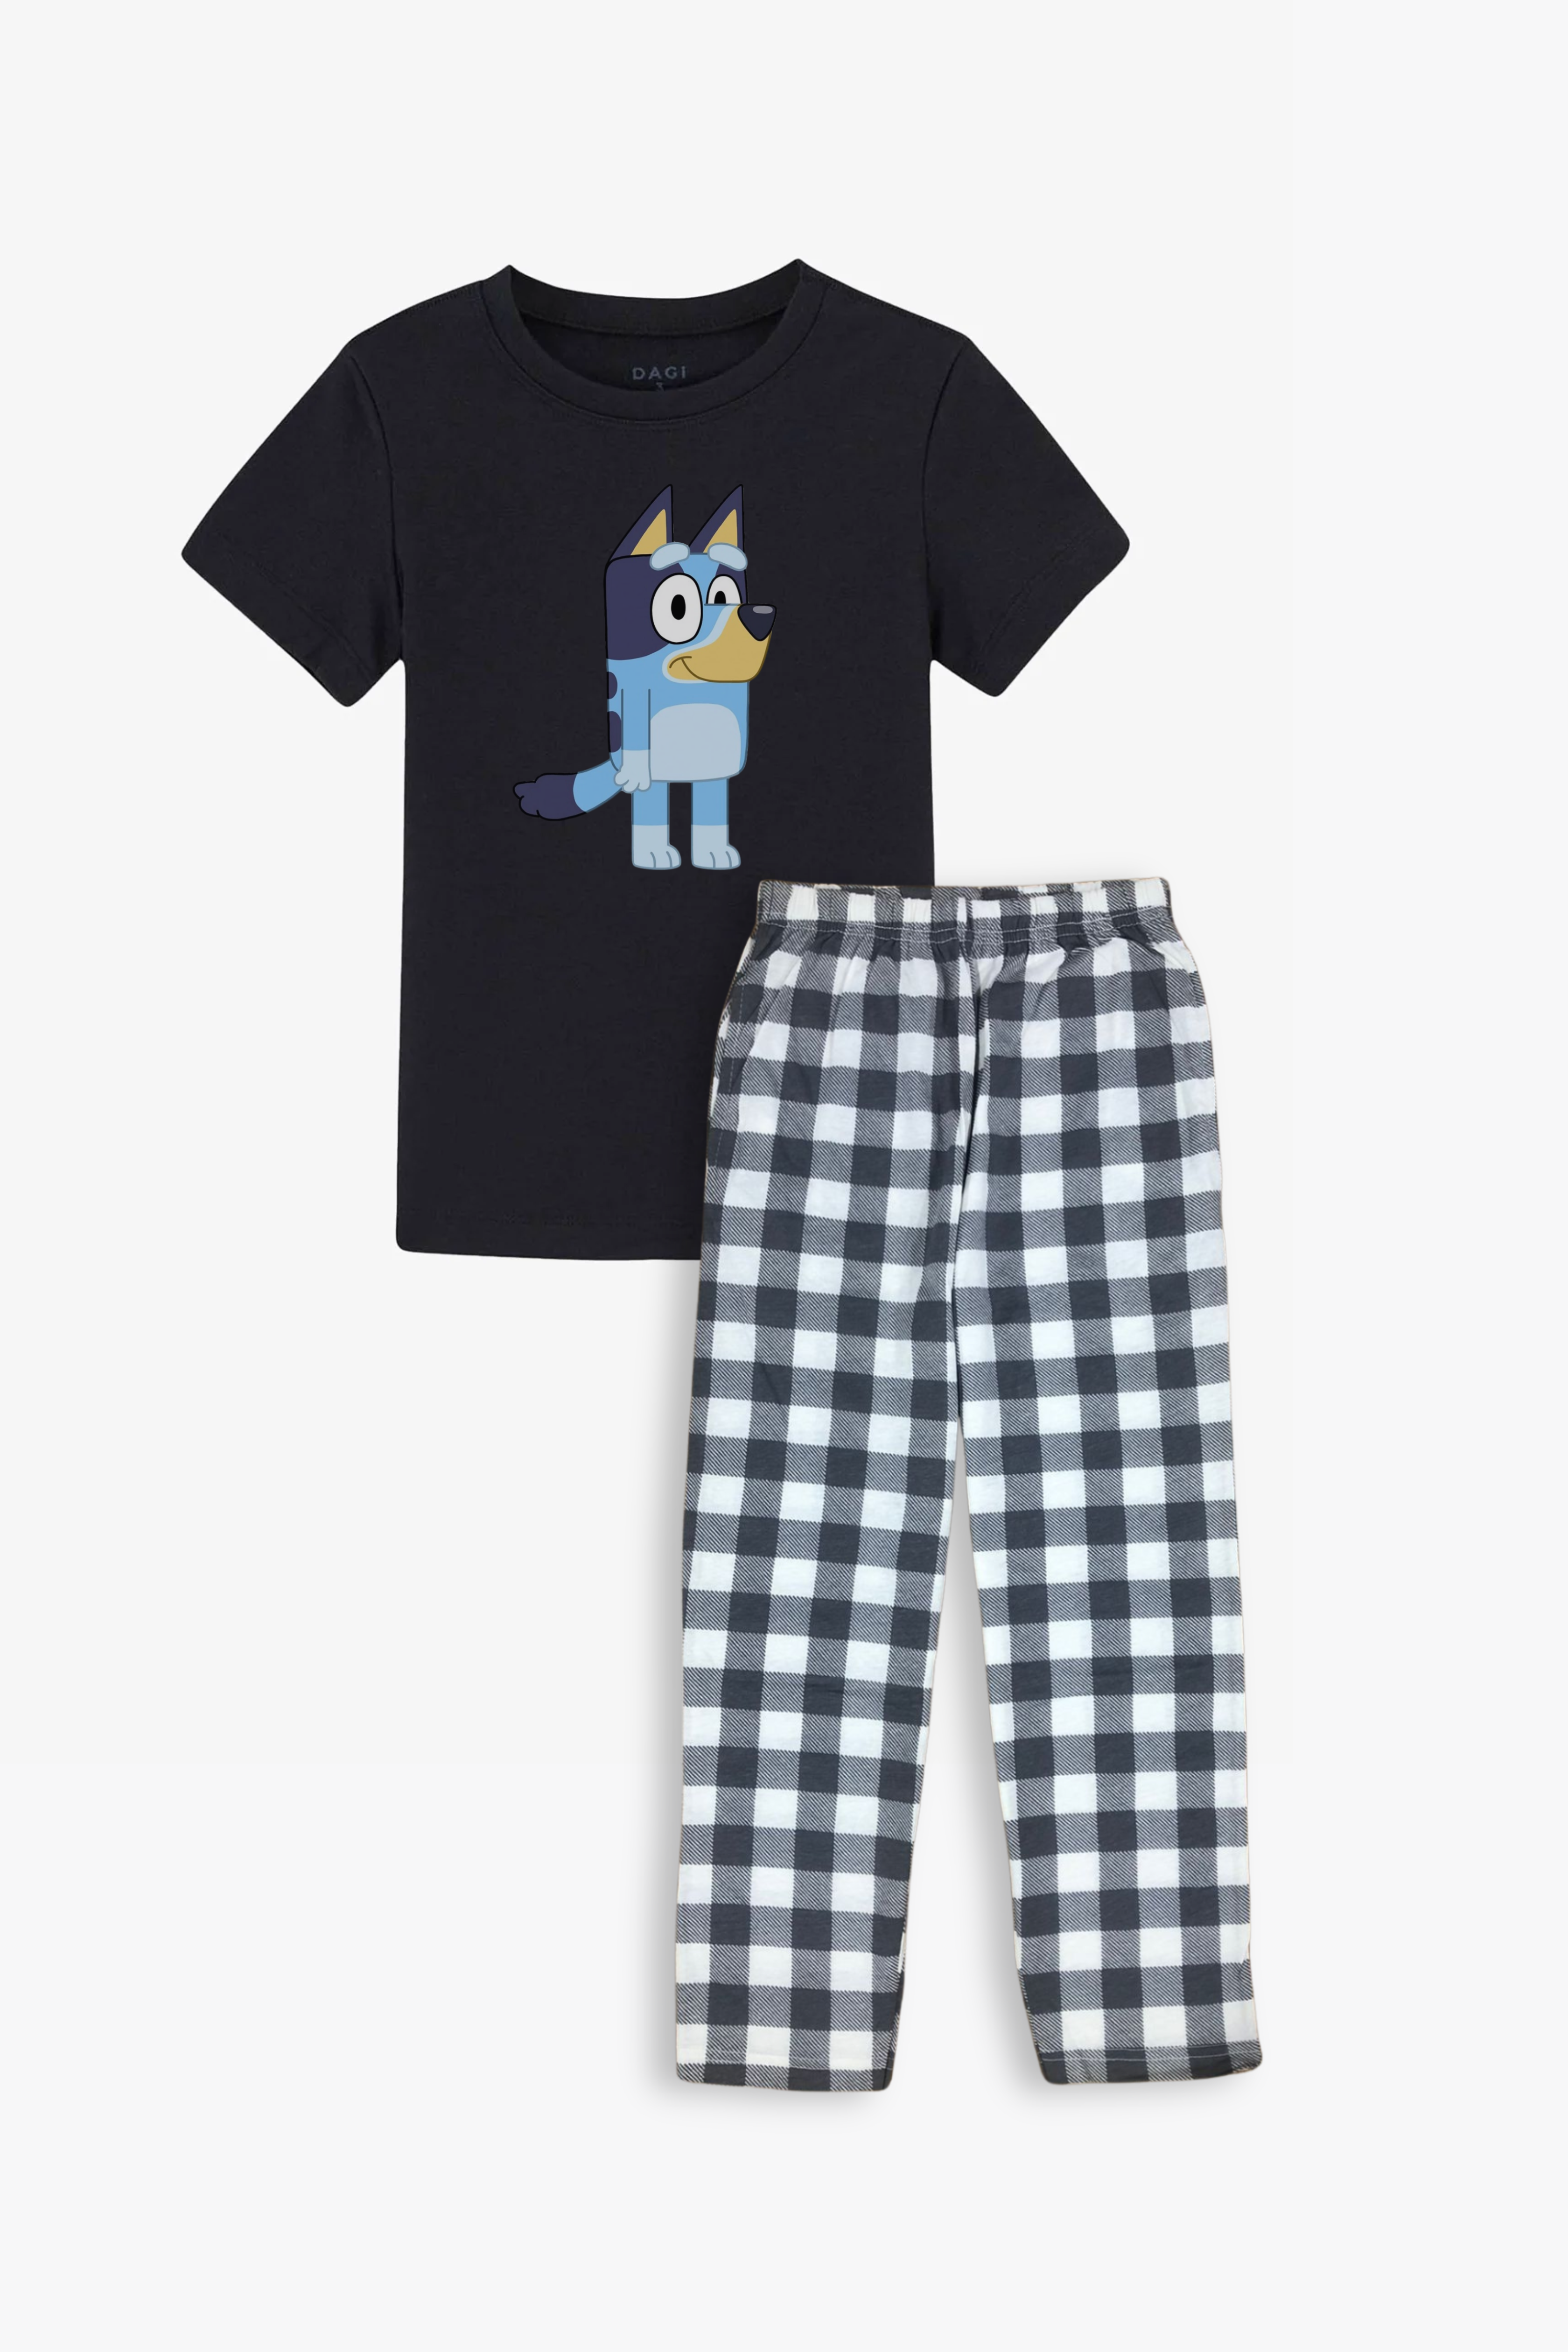 Kids T-Shirt and Check Trouser (Short Sleeves)